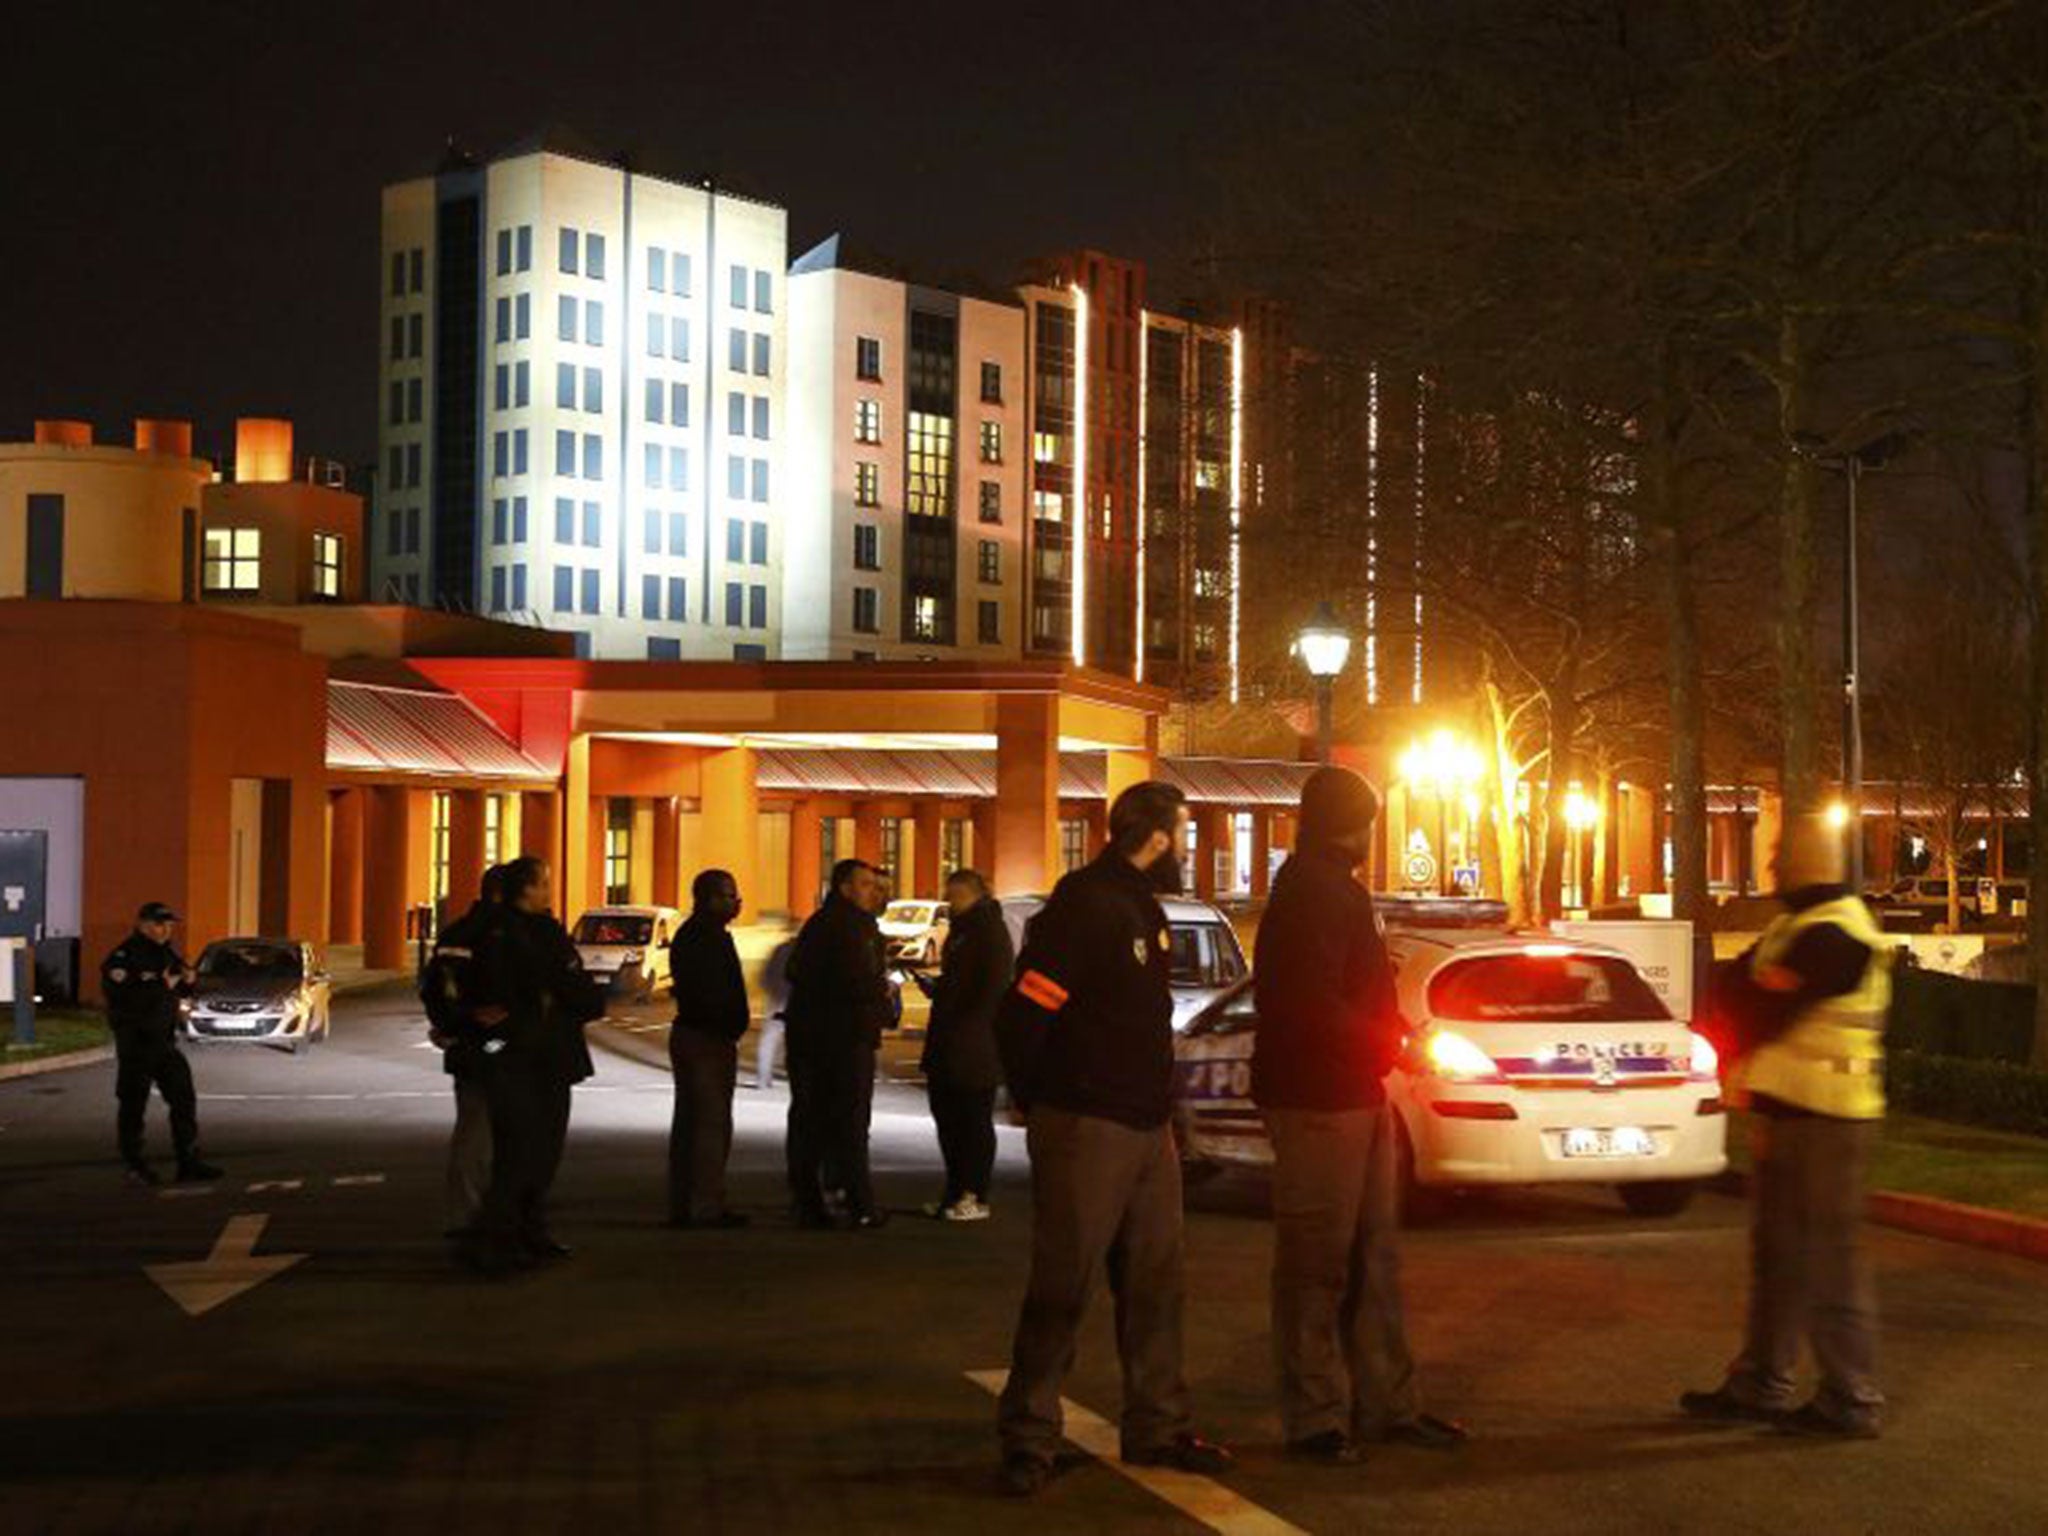 French police officers secure the New York hotel, located at the entrance of Disneyland Paris